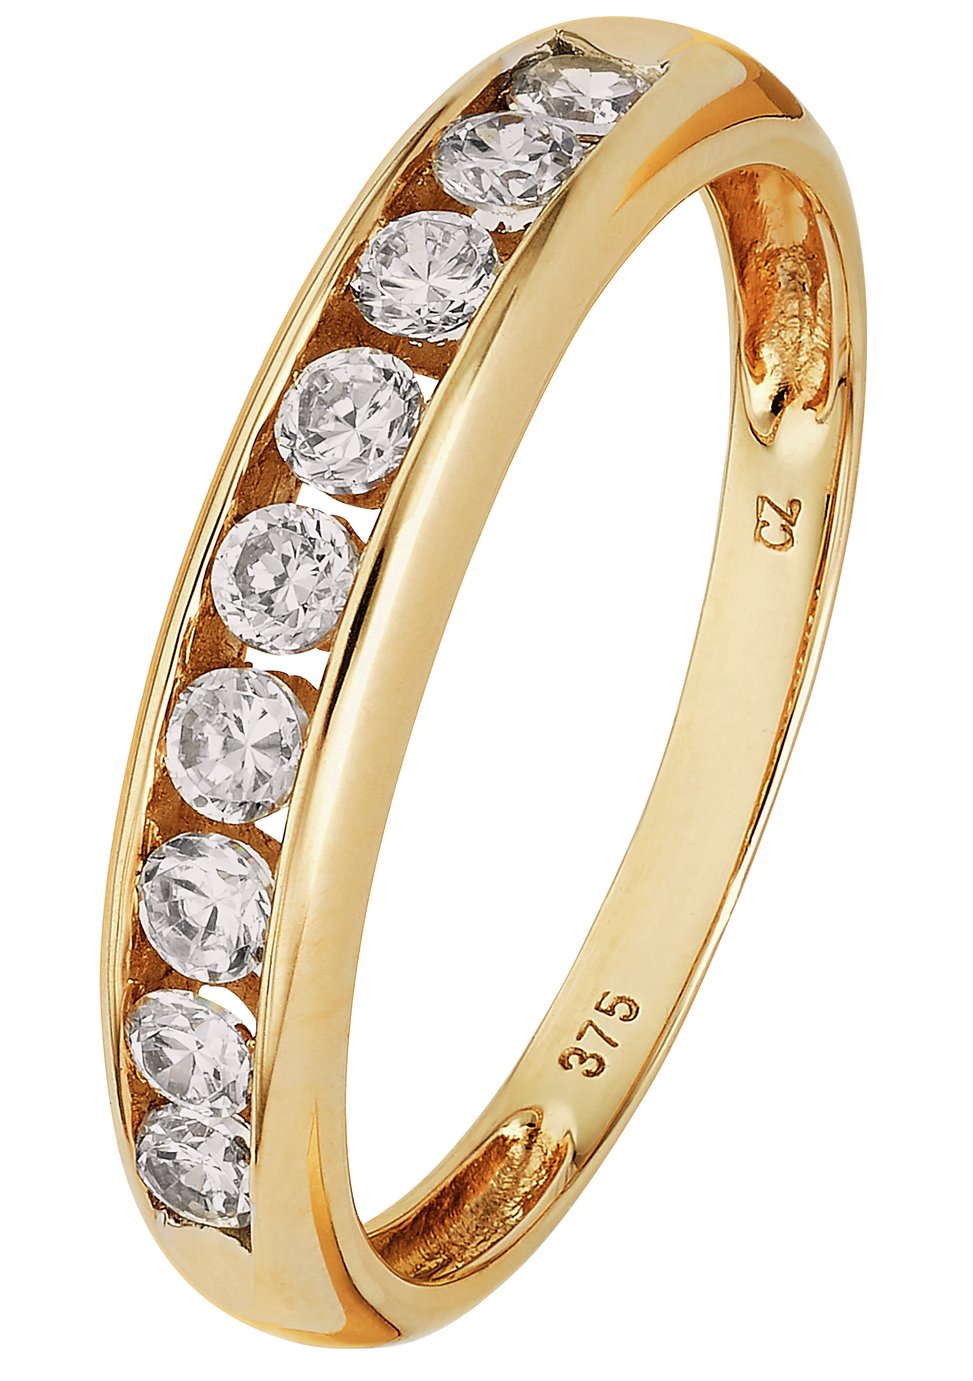 Revere 9ct Gold Cubic Zirconia 9 Stone Eternity Ring - N